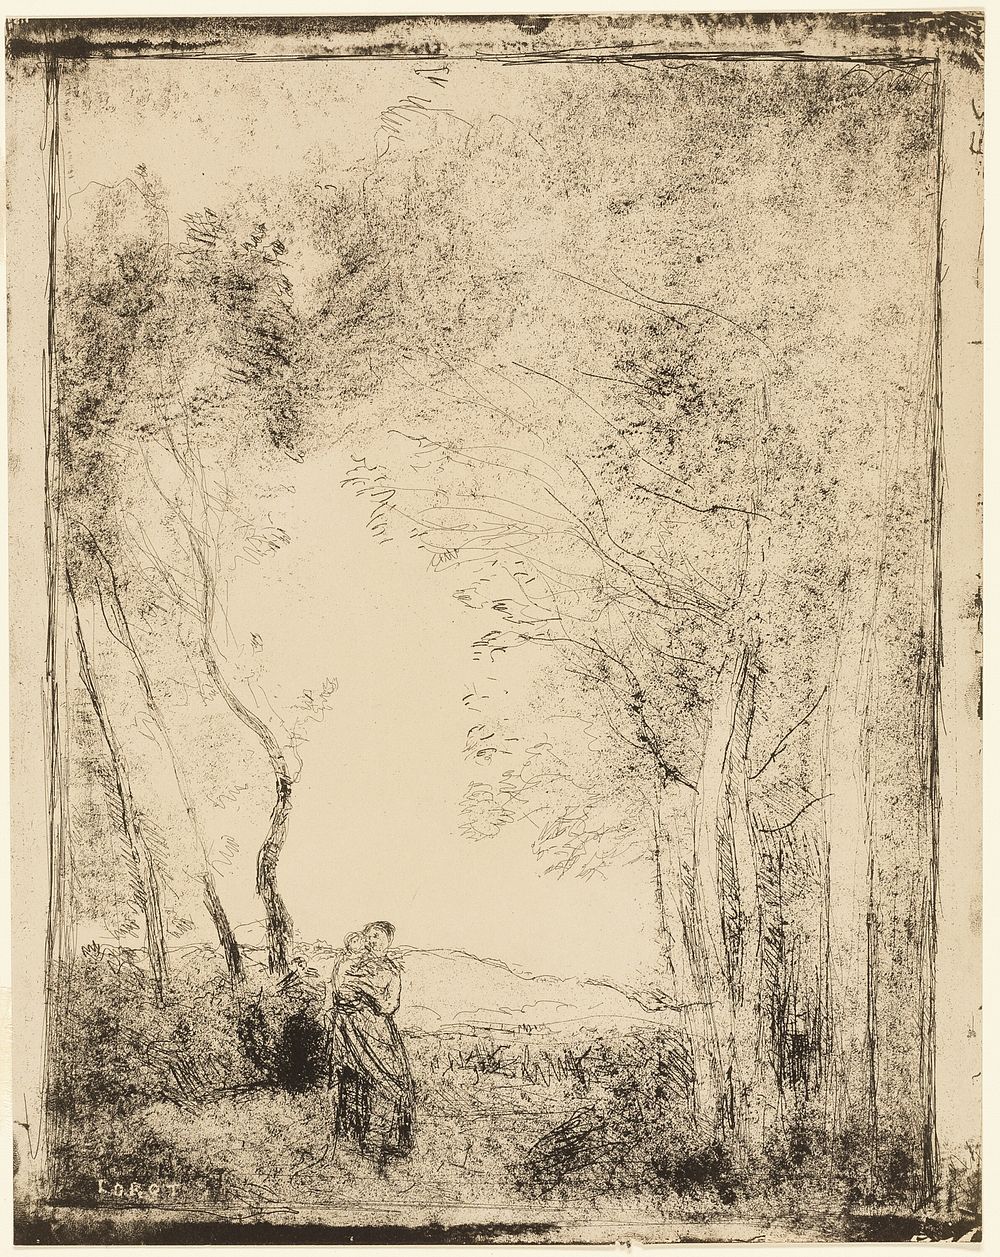 Young Mother at the Edge of the Woods by Jean Baptiste Camille Corot